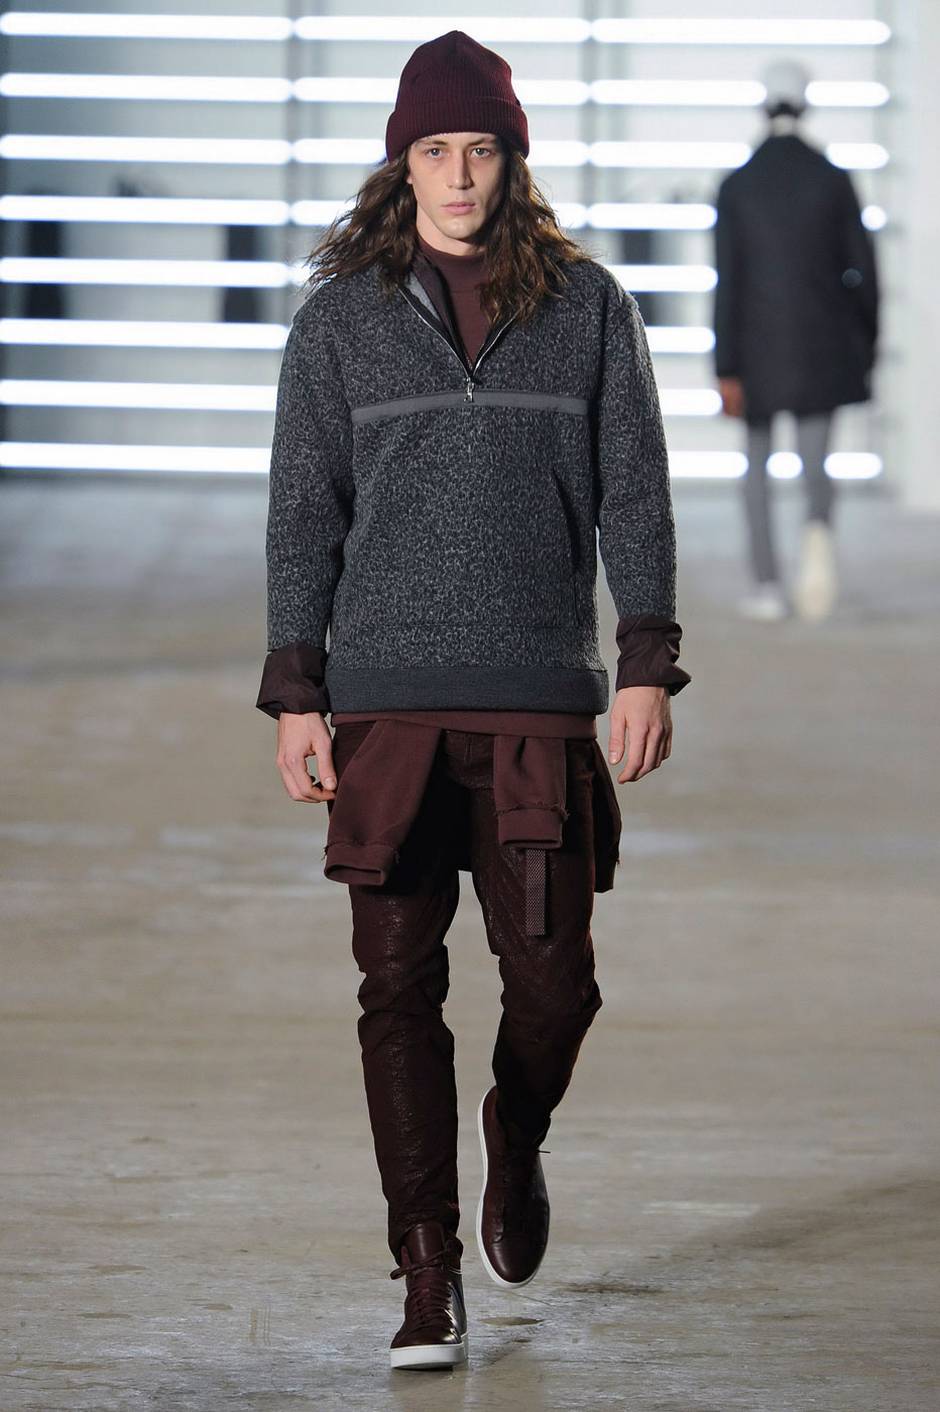 The coolest looks from men’s fashion week in New York - The Globe and Mail